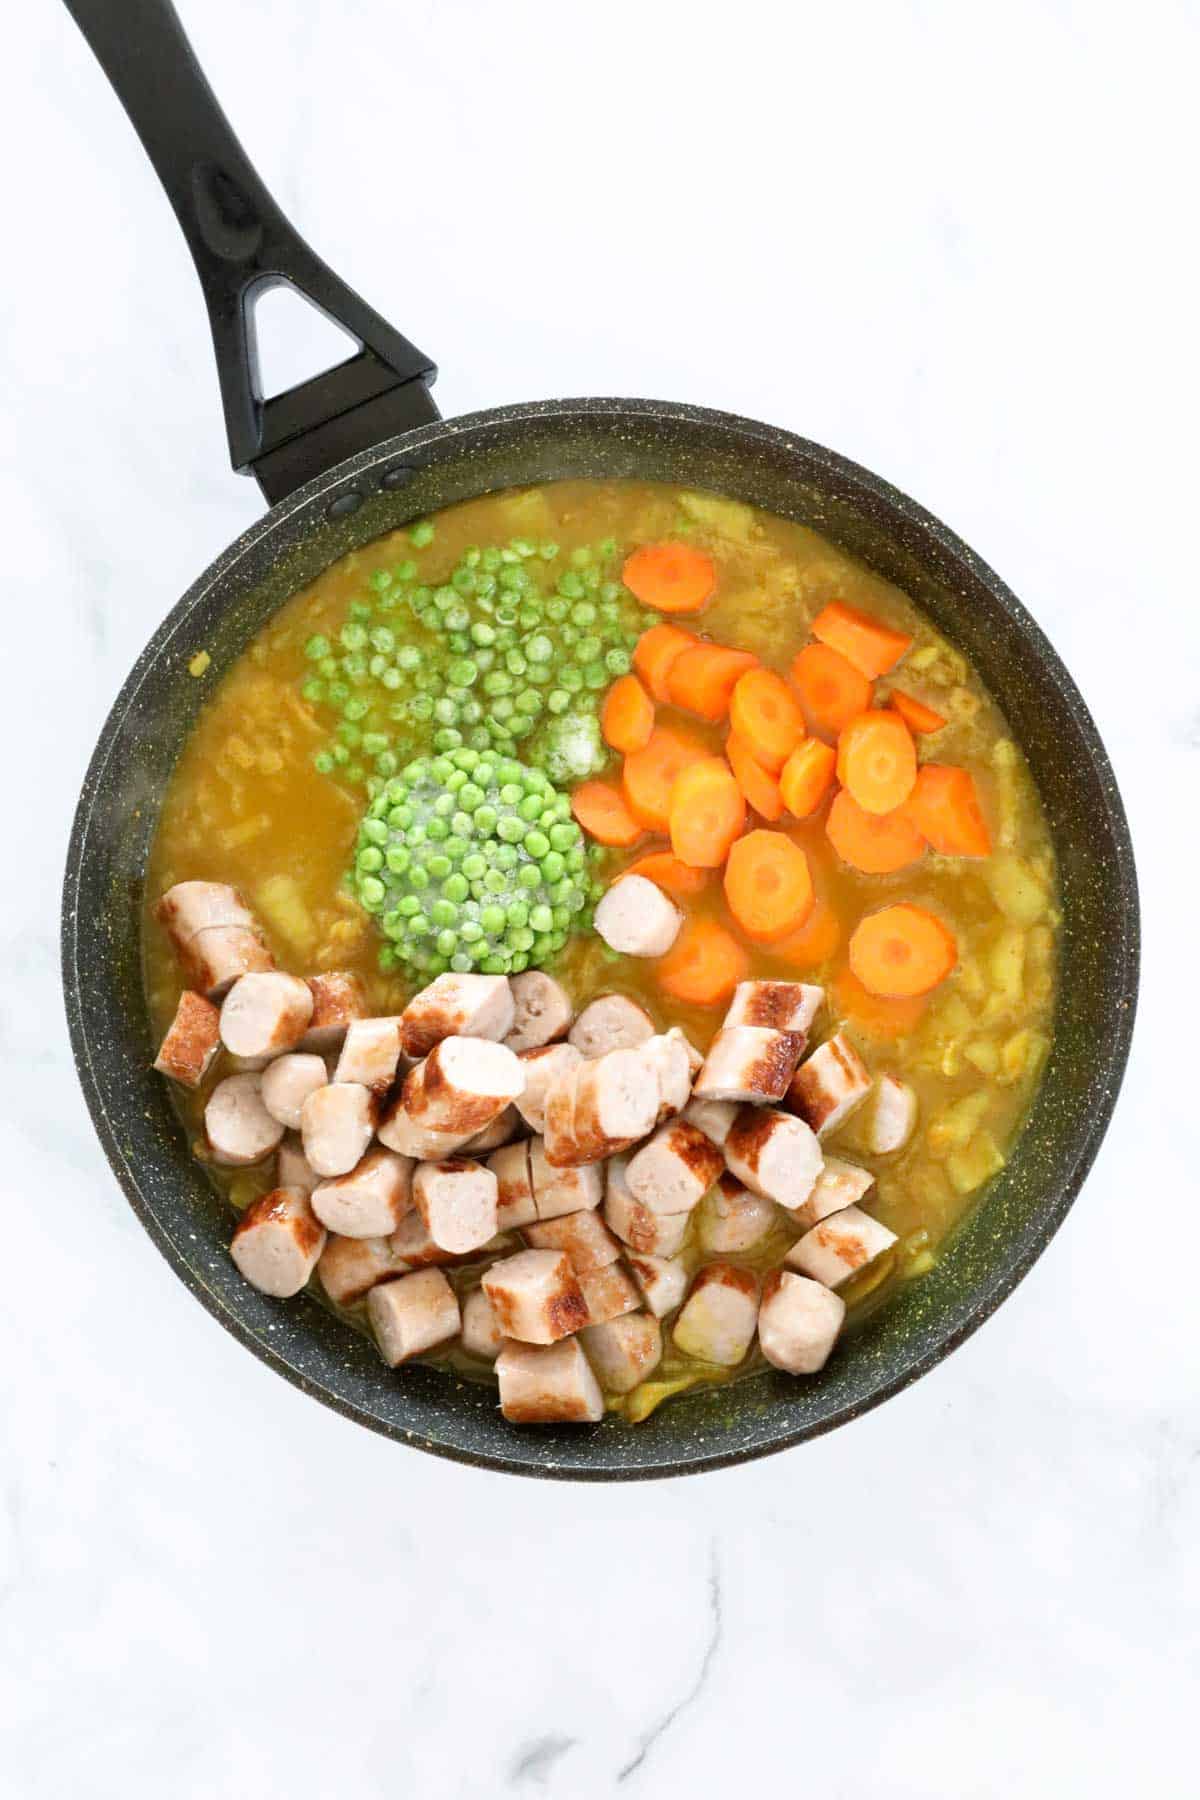 Chunks of sausage, sliced carrot and peas added to the gravy.